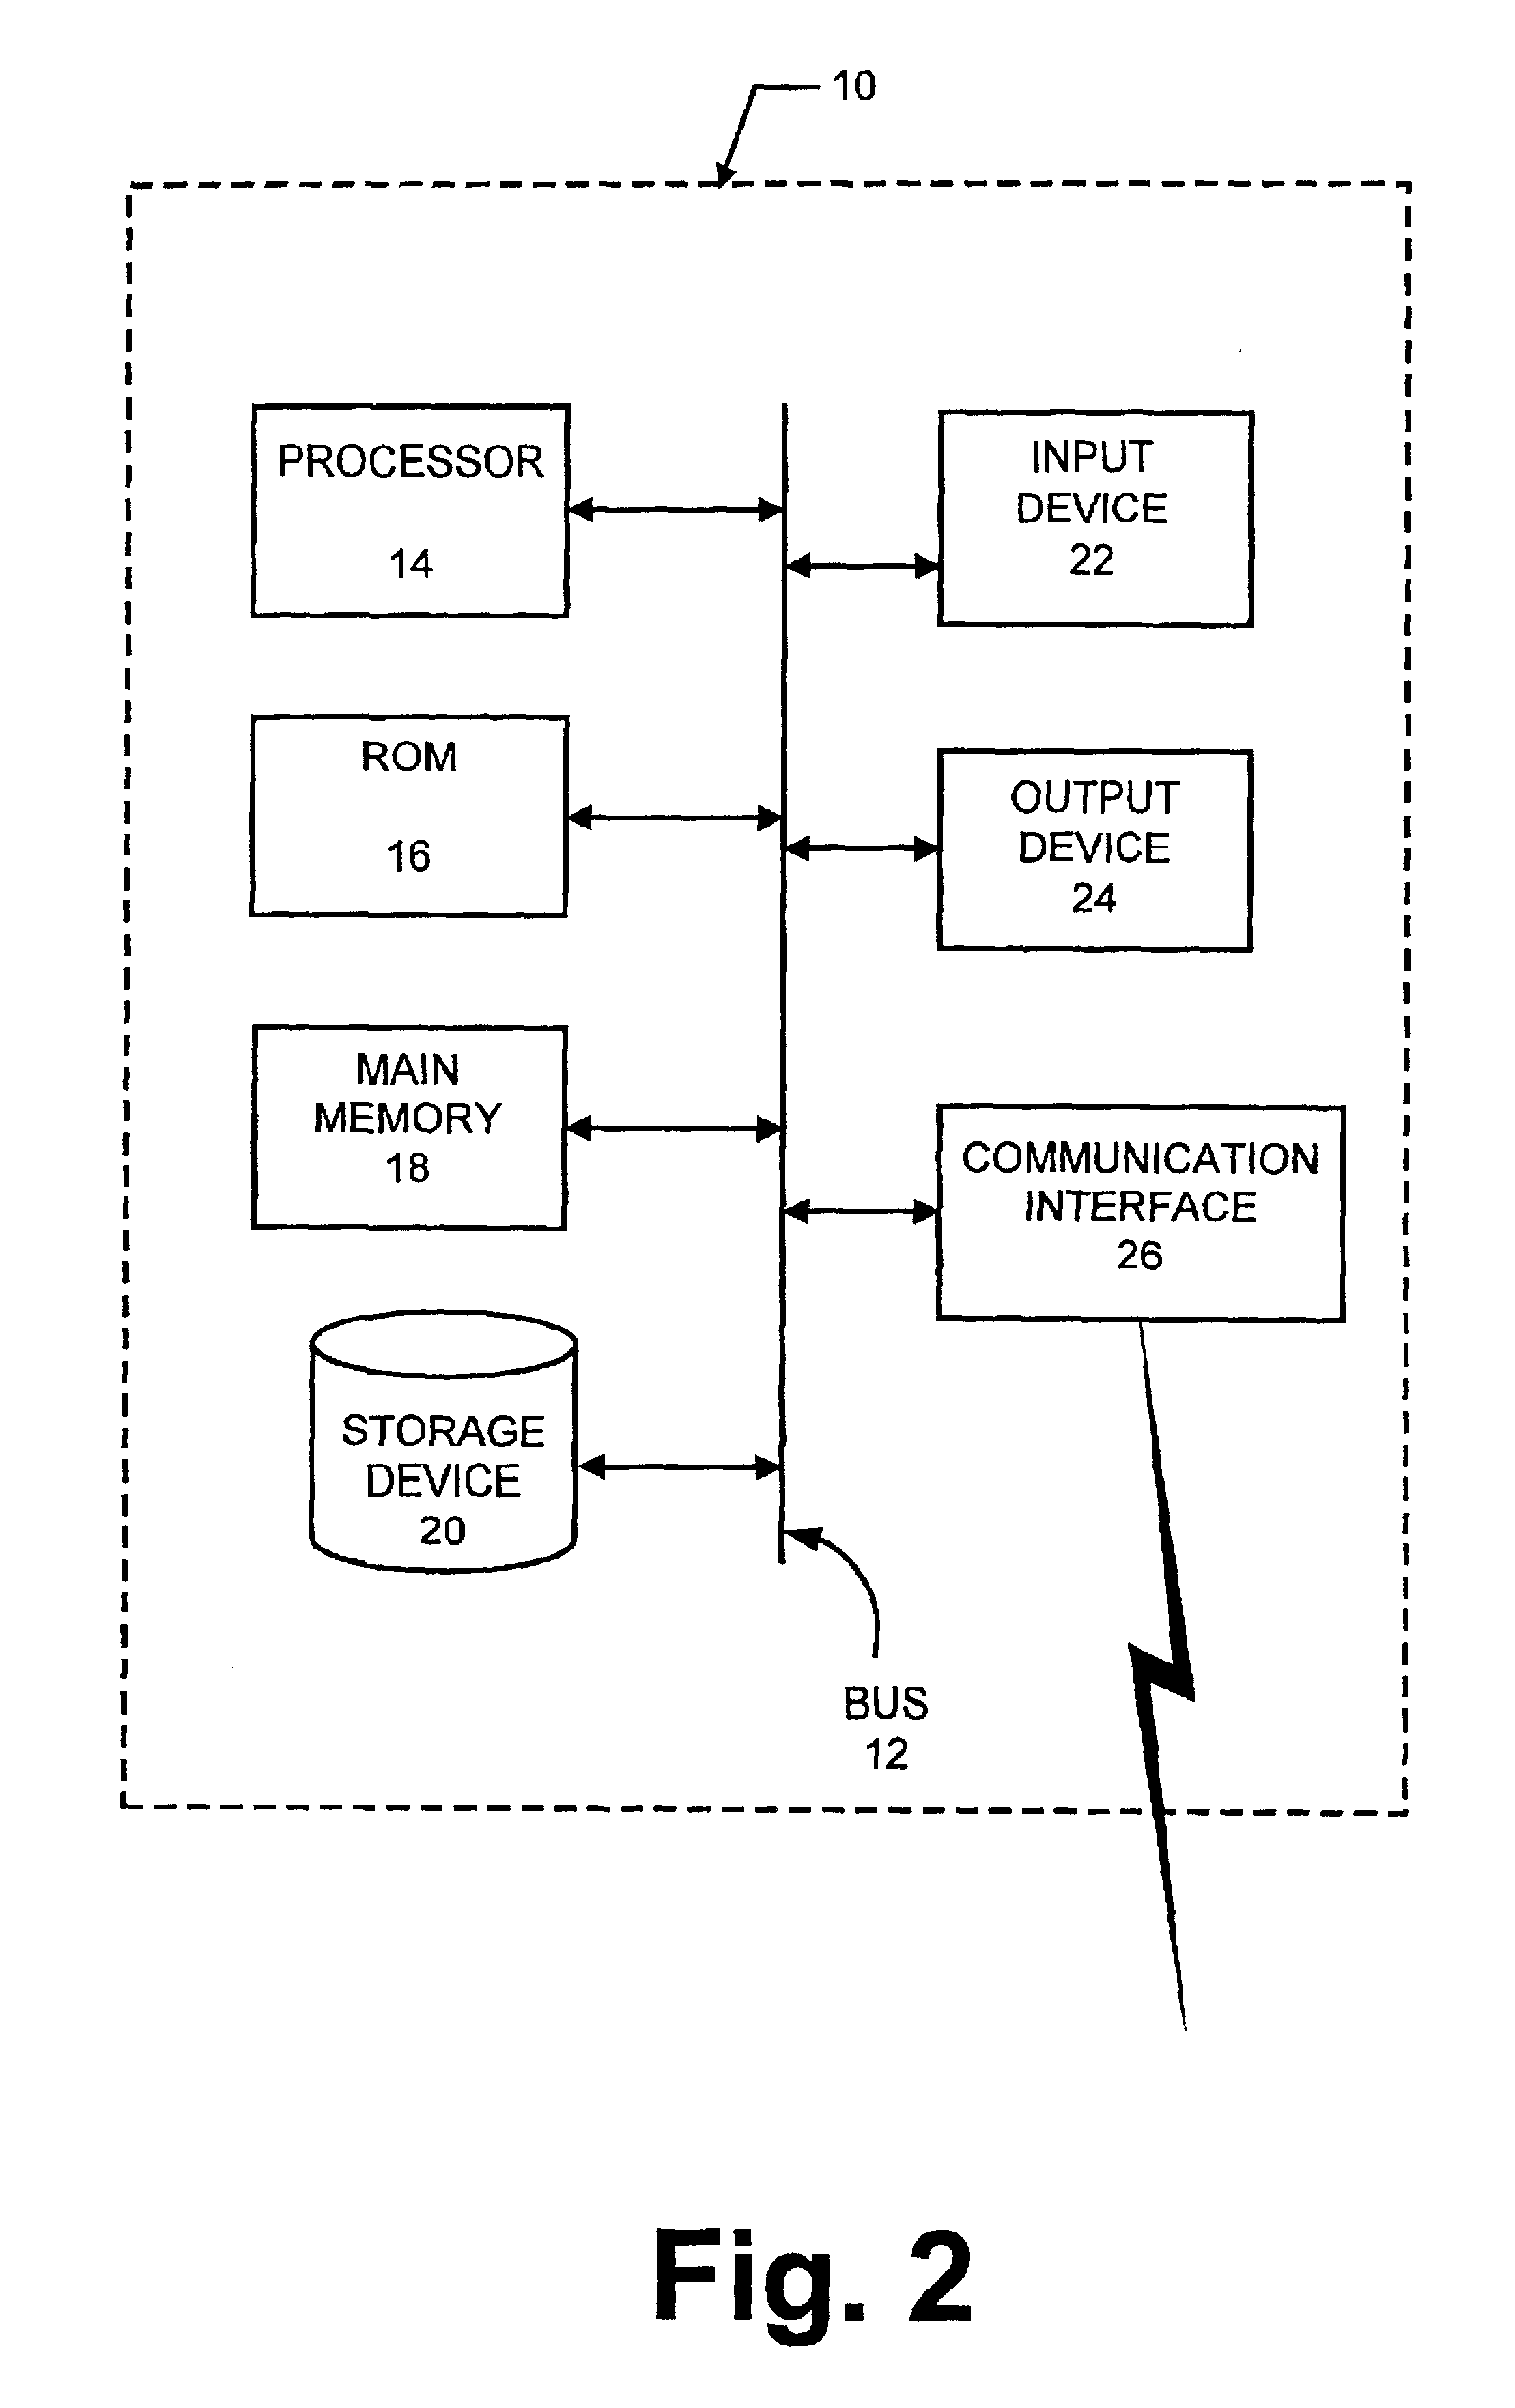 Computer-implemented system and method for simulating motor vehicle and bicycle traffic